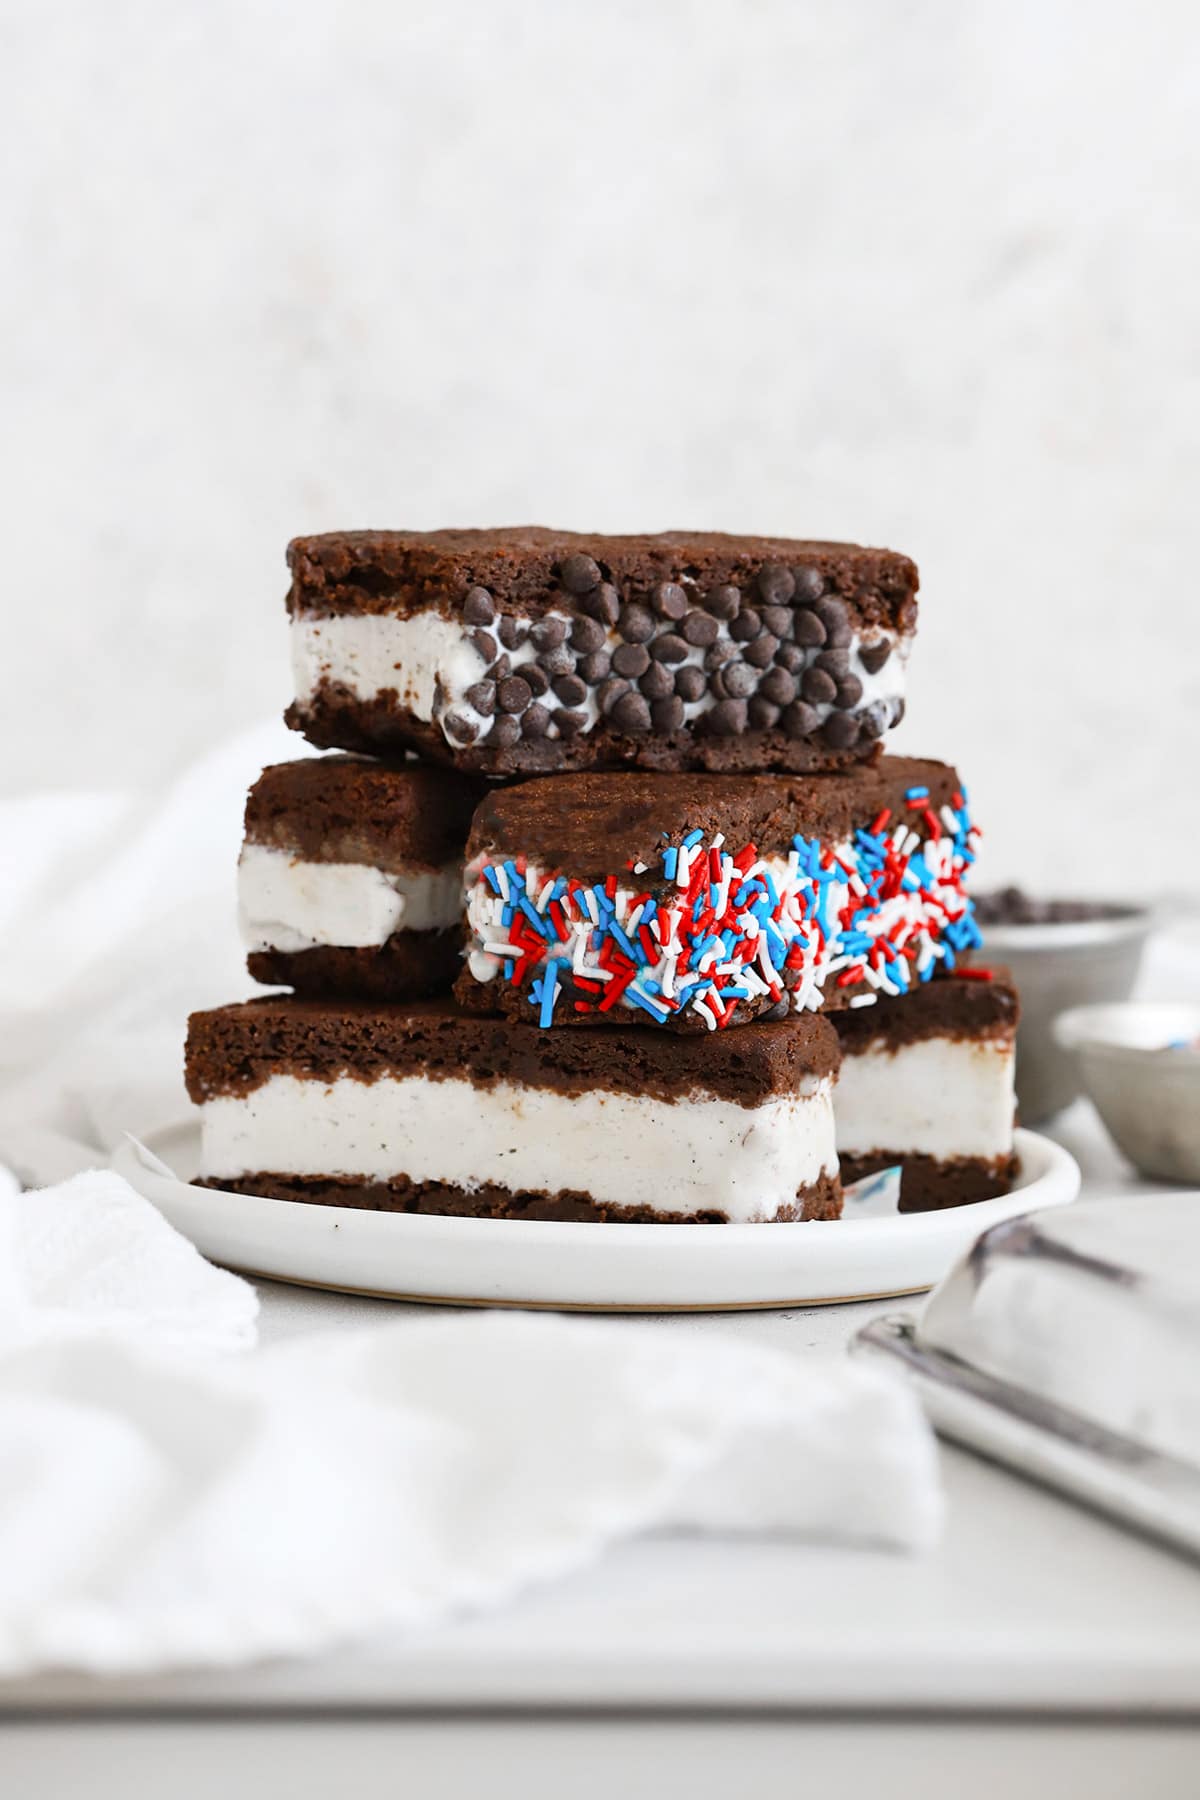 Gluten free ice cream sandwiches stacked on a plate. One is rolled in mini chocolate chips and one is rolled in red, white, and blue jimmies sprinkles